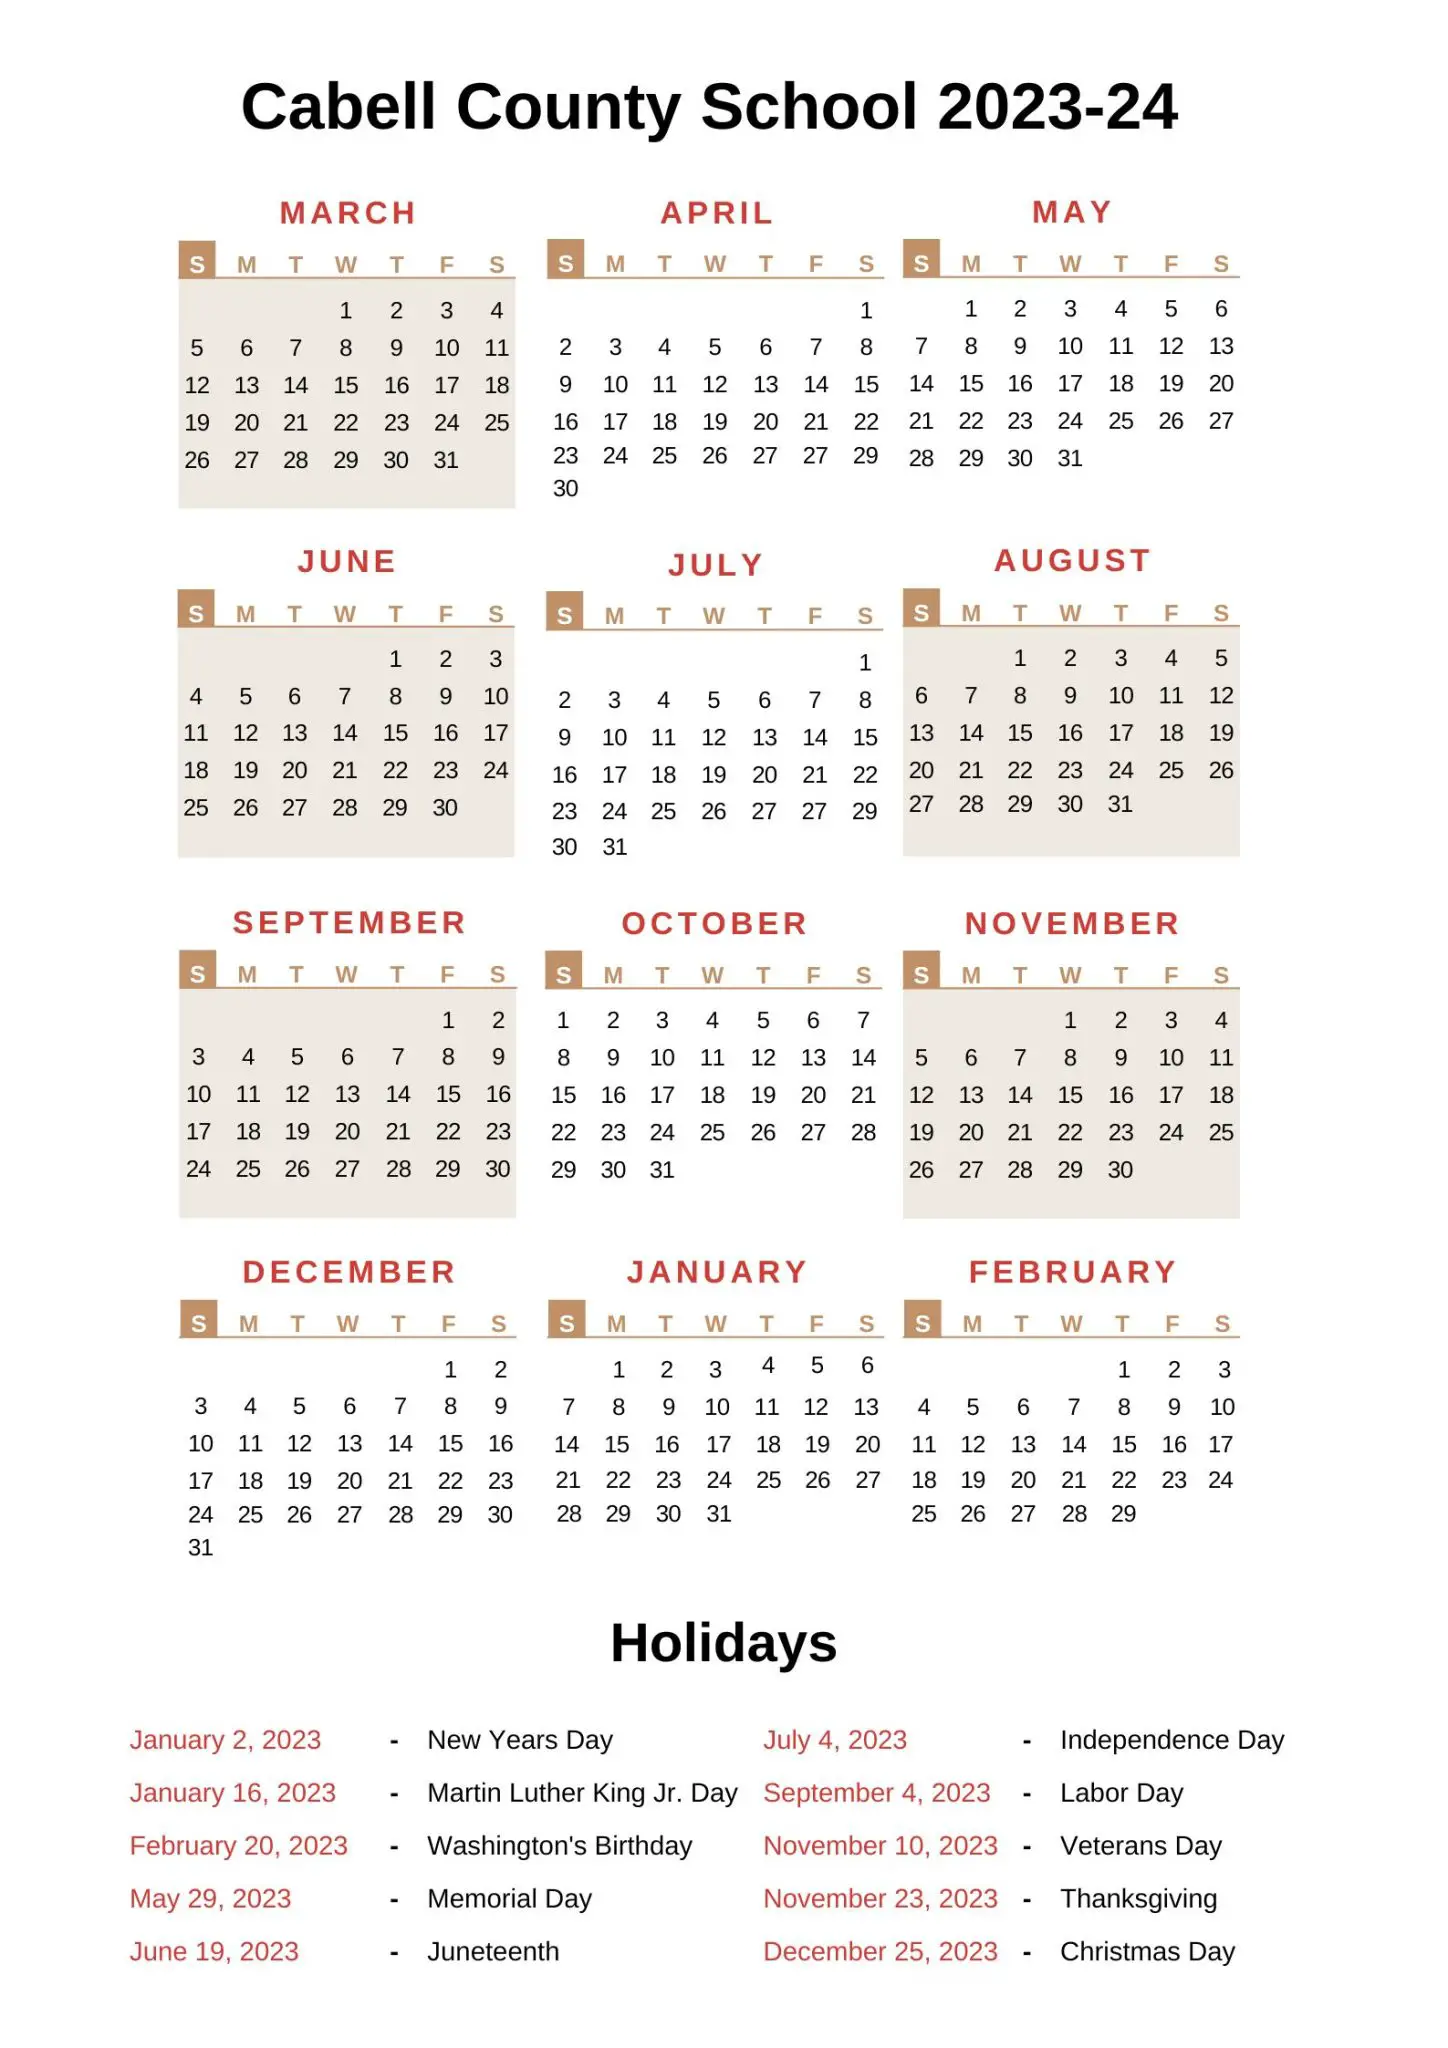 cabell-county-schools-calendar-ccs-2023-24-with-holidays